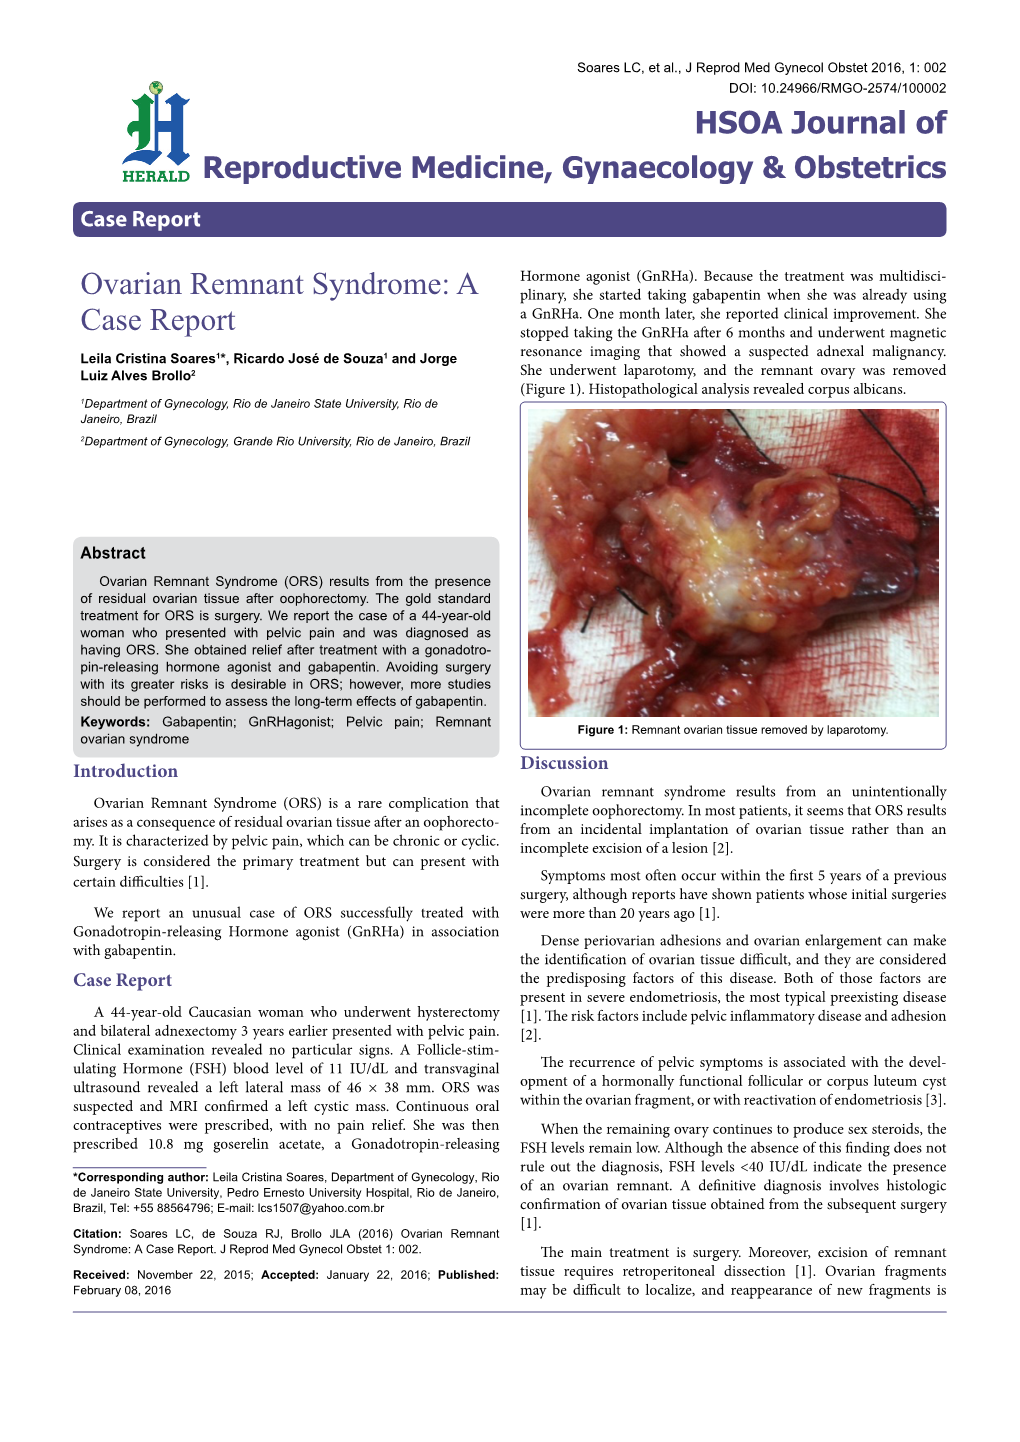 Ovarian Remnant Syndrome: a Case Report